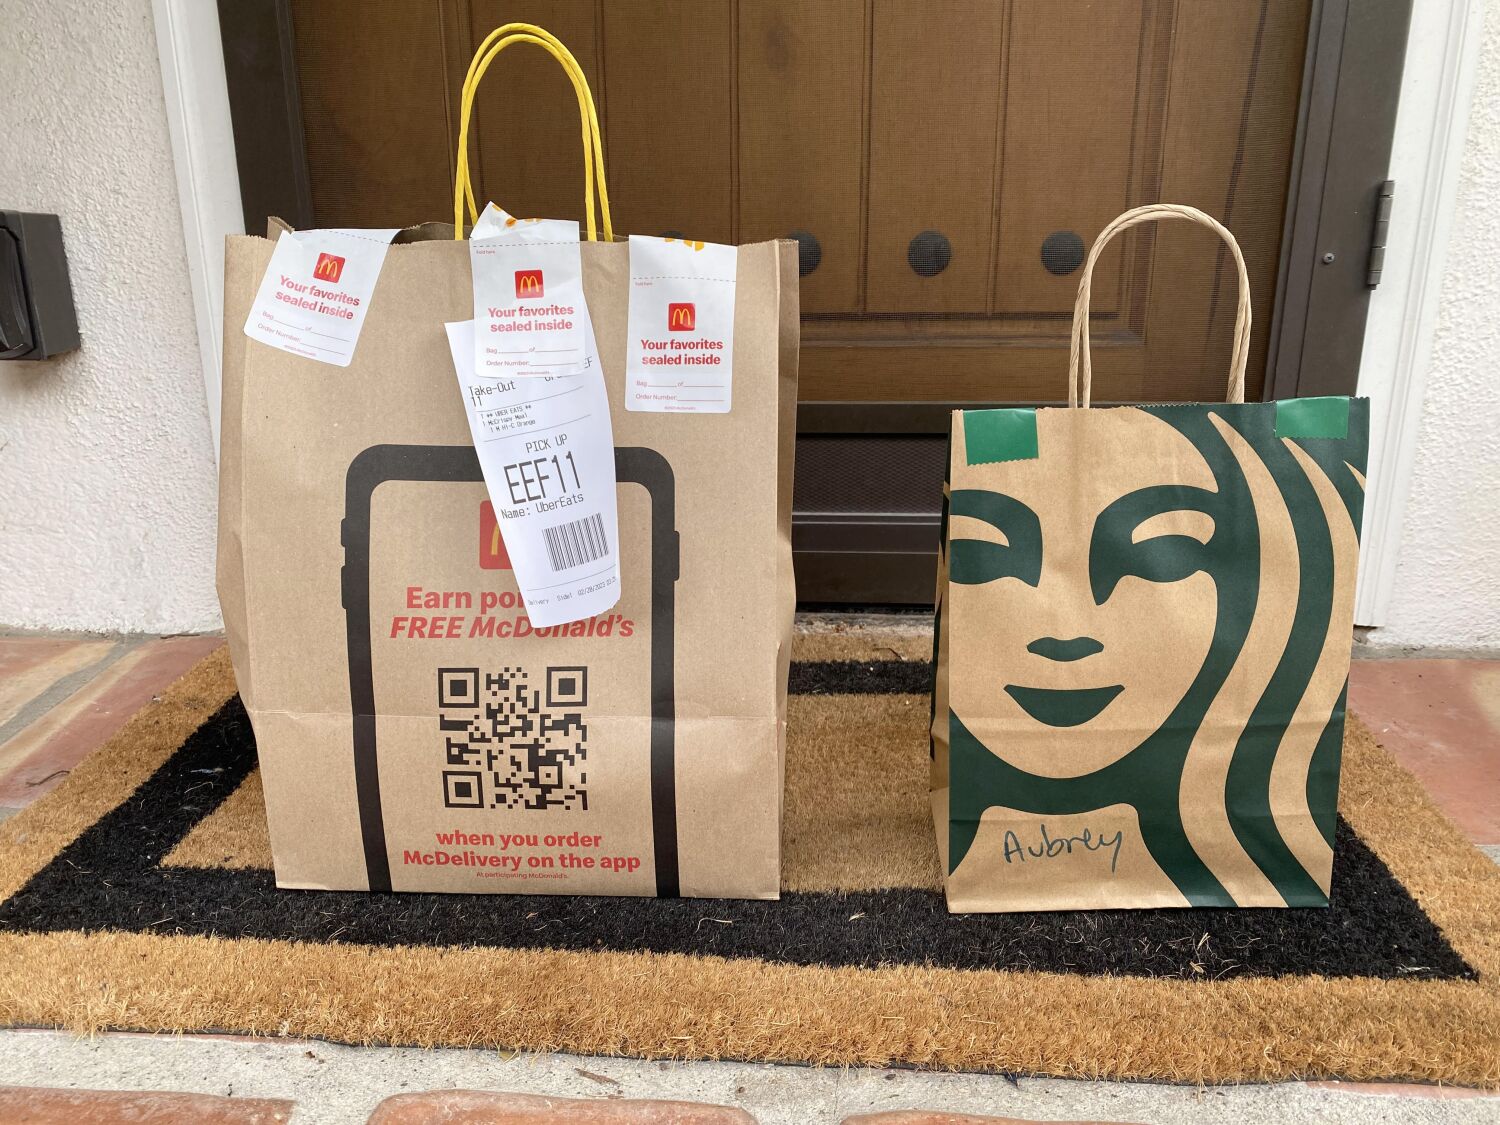 A tasty L.A. mystery: Unwanted Uber Eats food deliveries vex Highland Park neighborhood